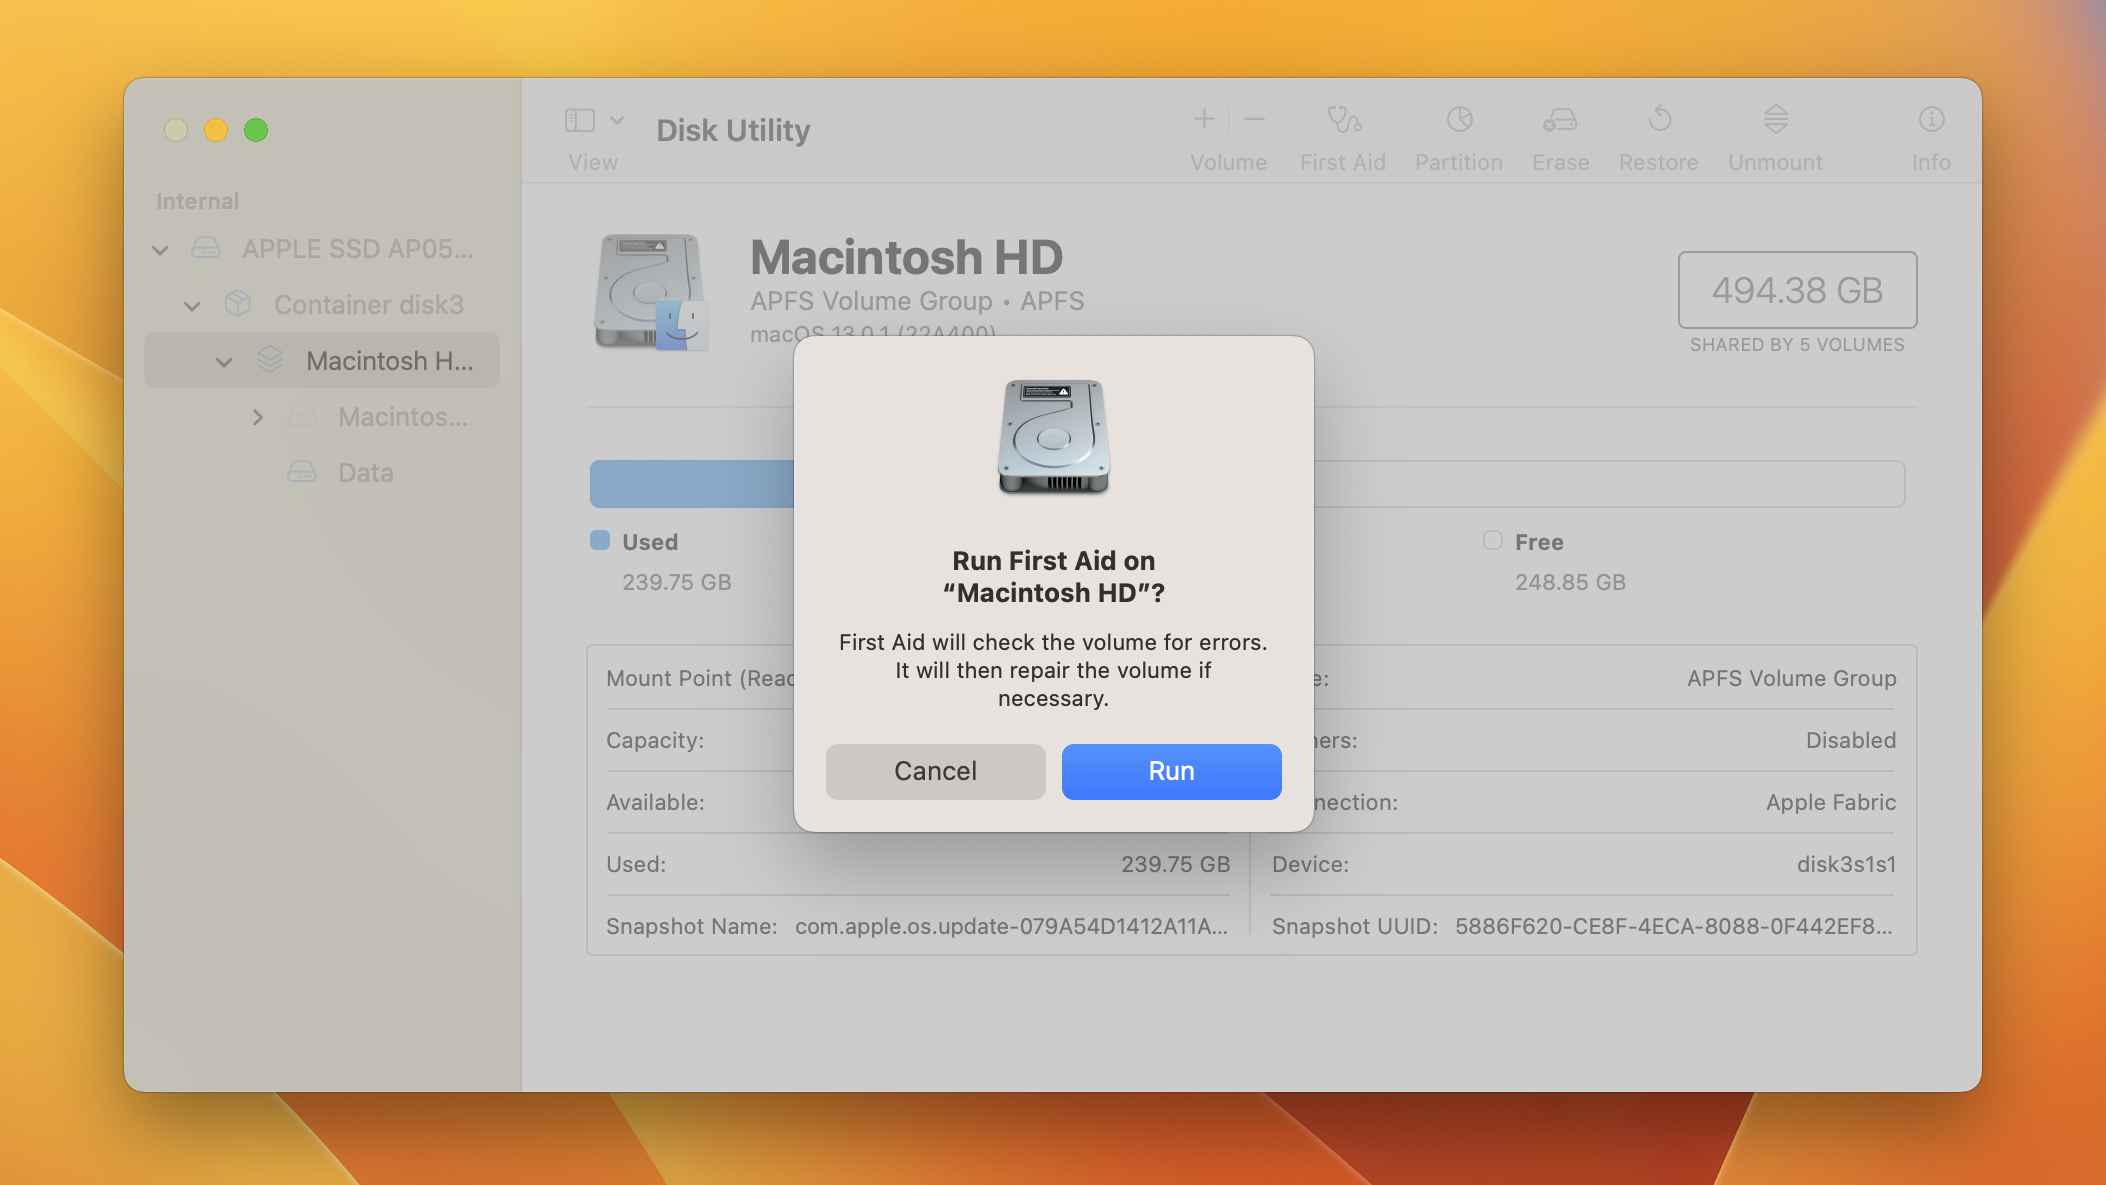 Disk Utility in macOS Ventura displays a dialog box with the option to run First Aid on a storage disk.